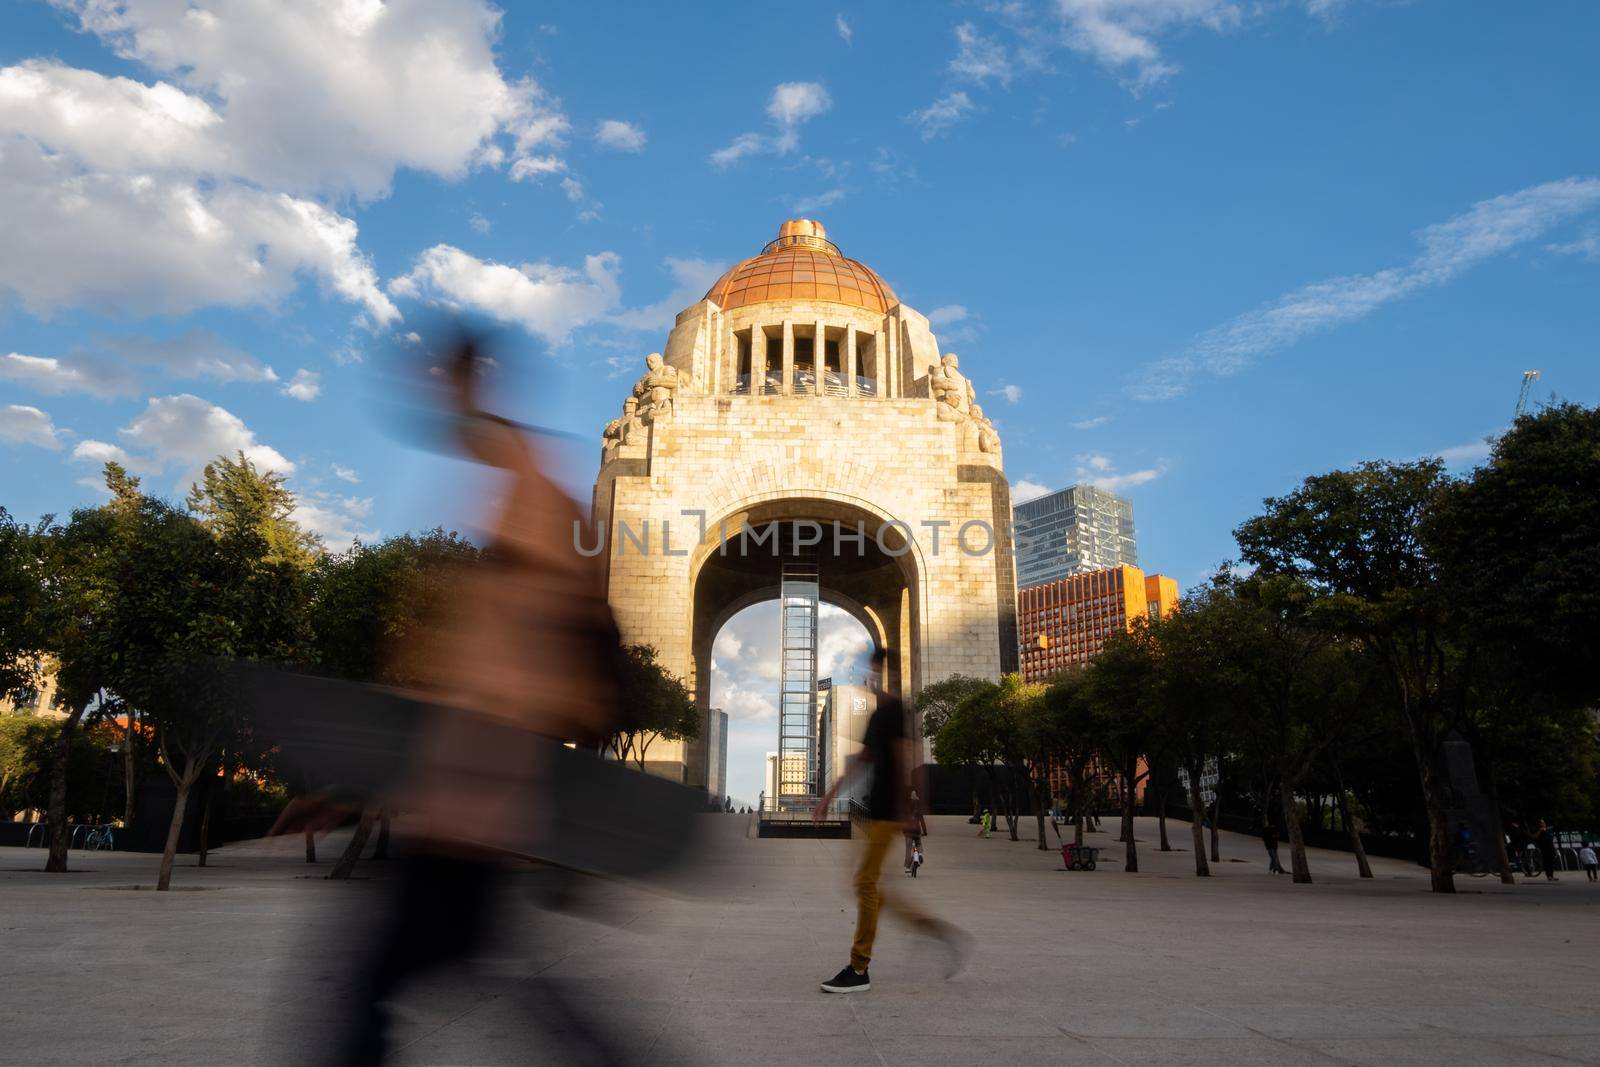 Mexico City, Mexico - January 13, 2021: Time-lapse of Monument to the Revolution with beautiful sky as background. Majestic triumphal arch in Mexico City with people passing by. Mexican landmarks